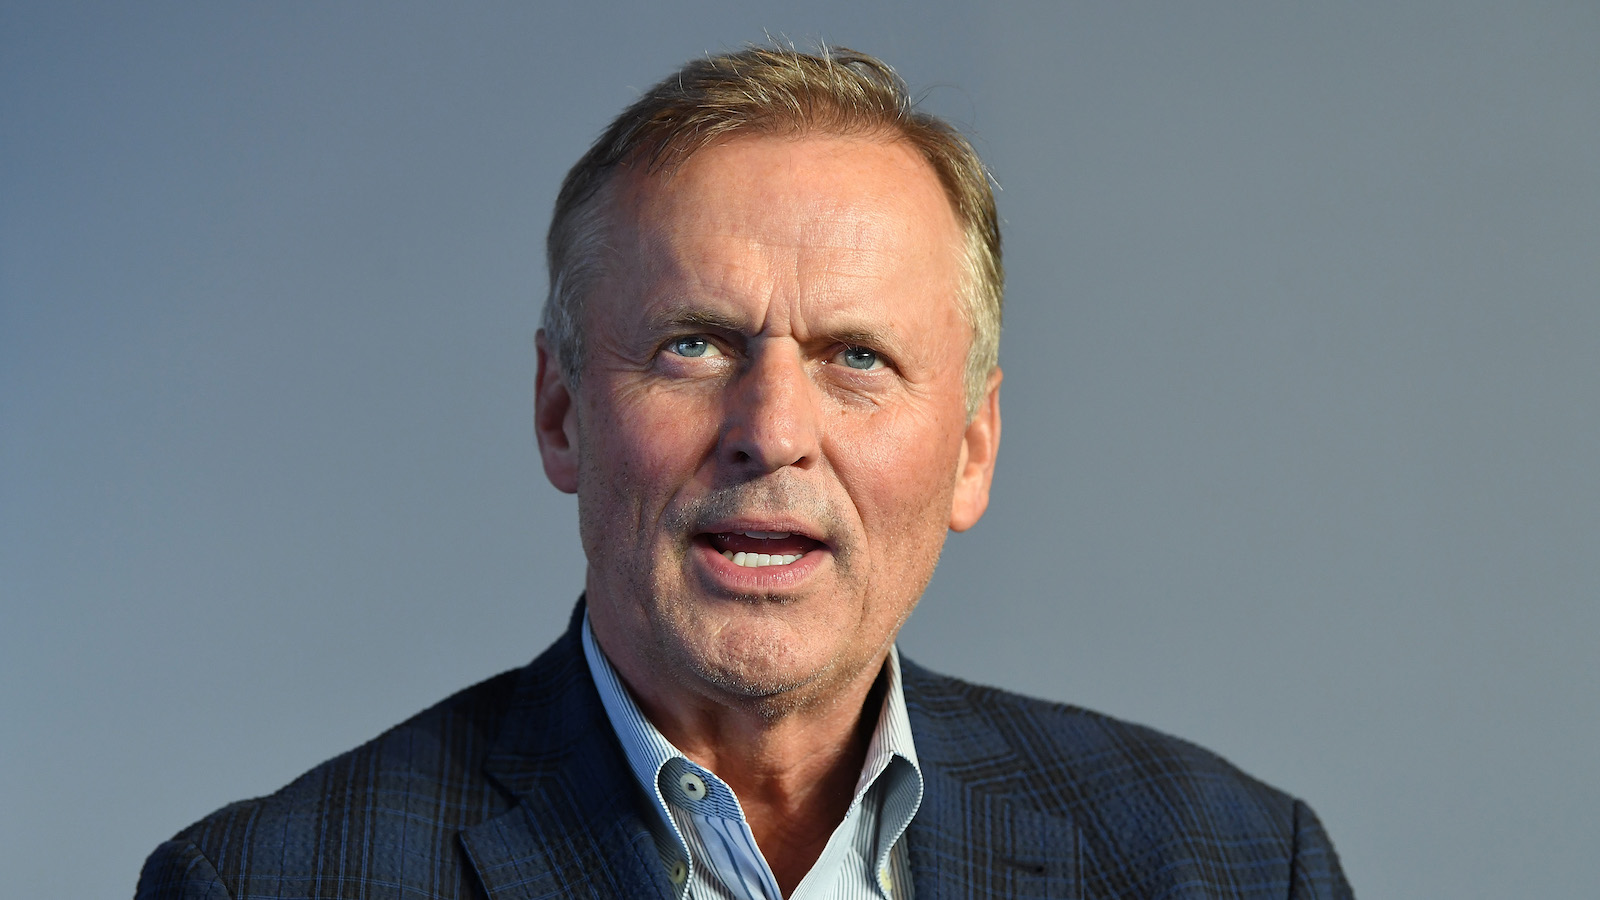 John Grisham wants all of his books to be banned